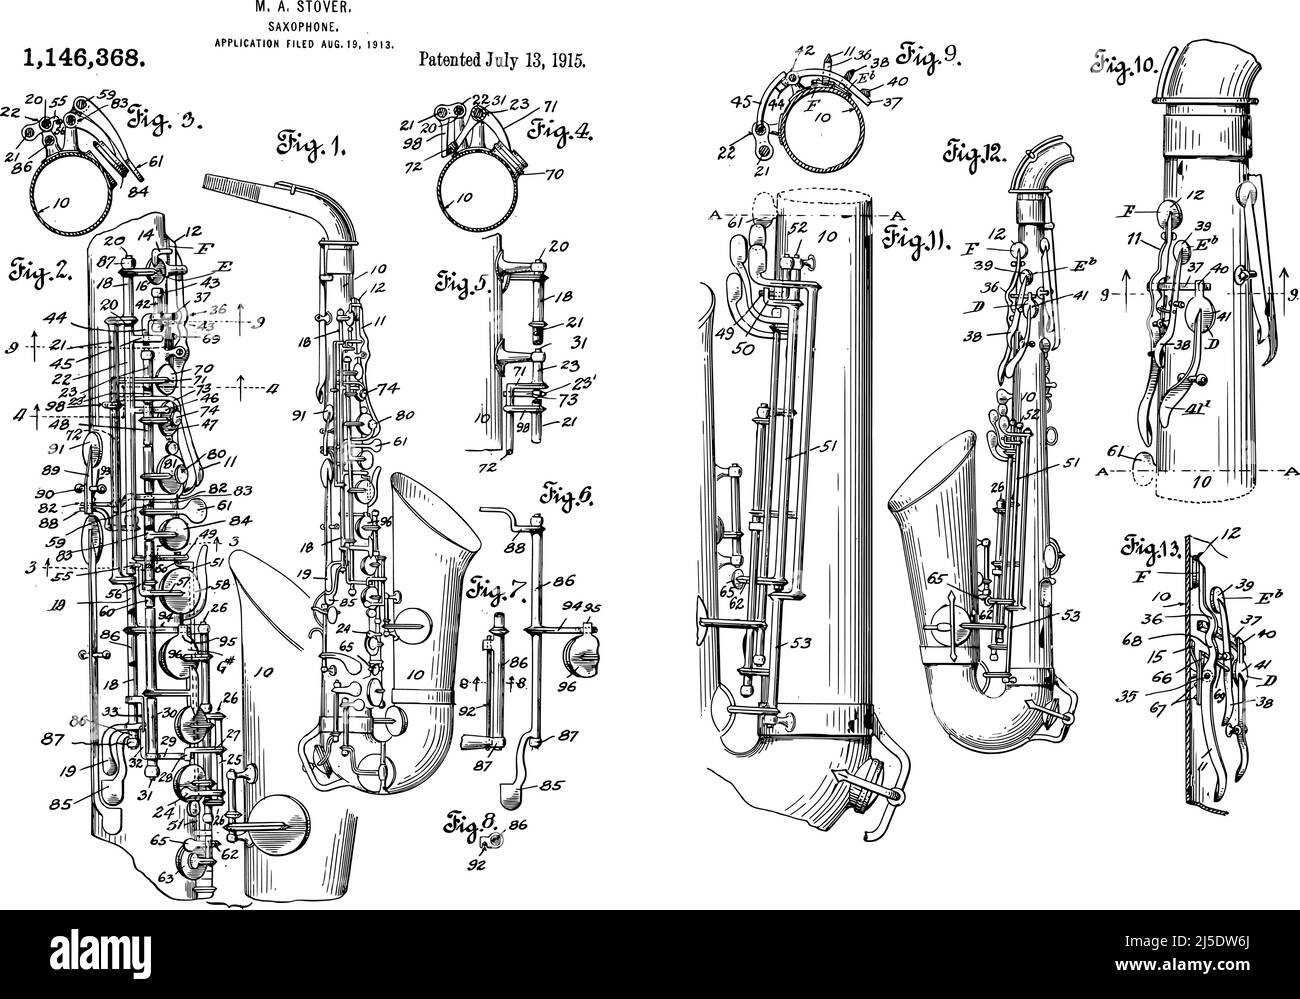 Vintage Saxophone Patent From 1915 Stock Vector